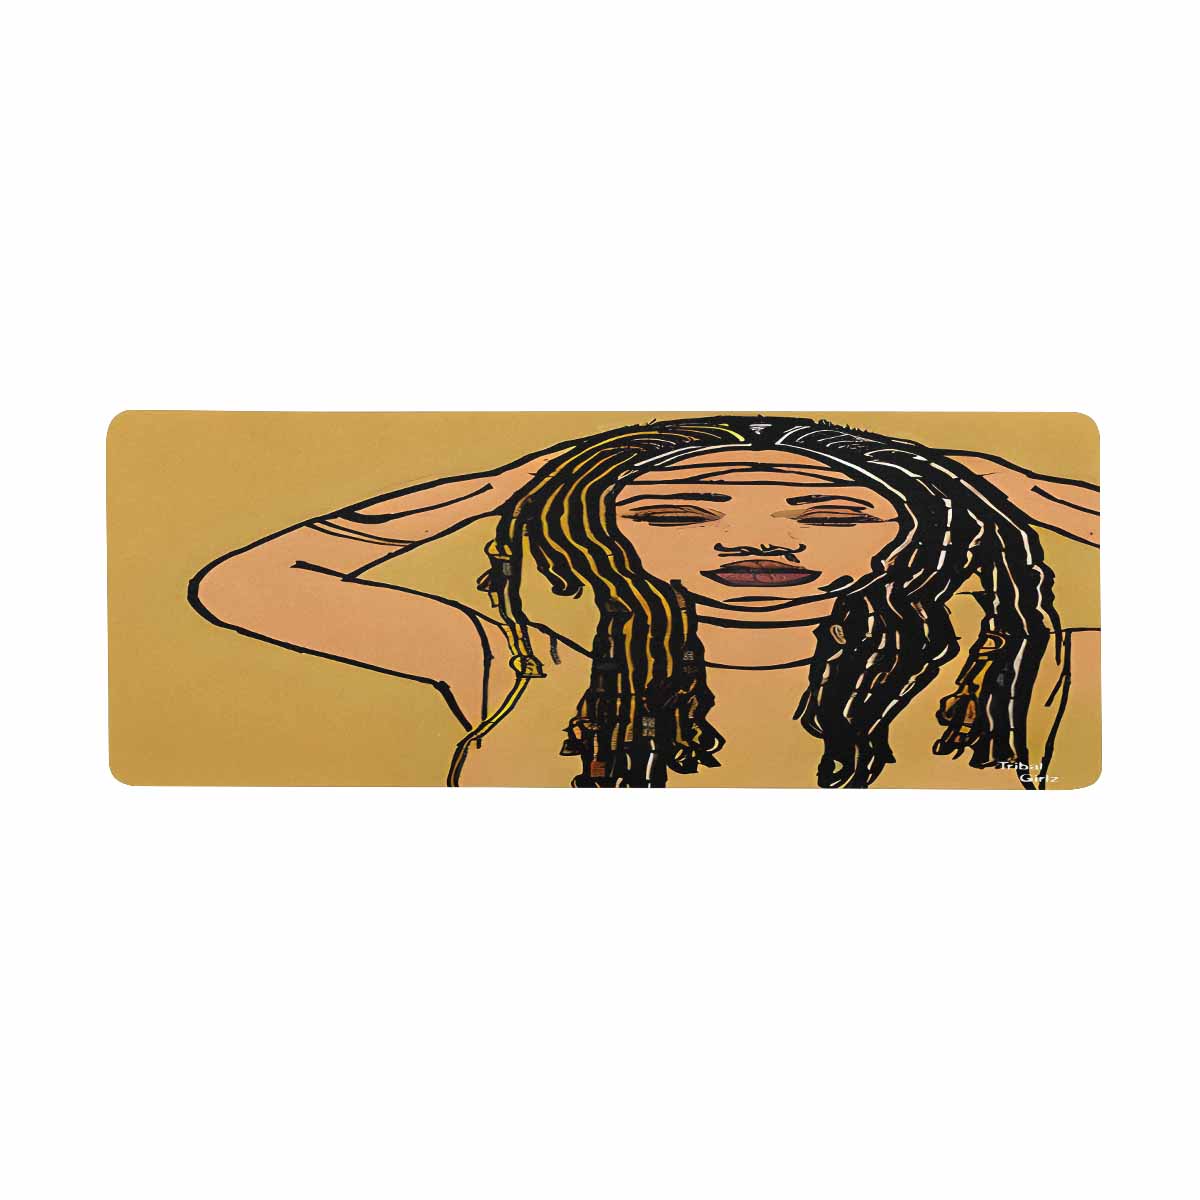 Dreads & Braids, 31 x 12 in large mouse pad, Fulangiara 24